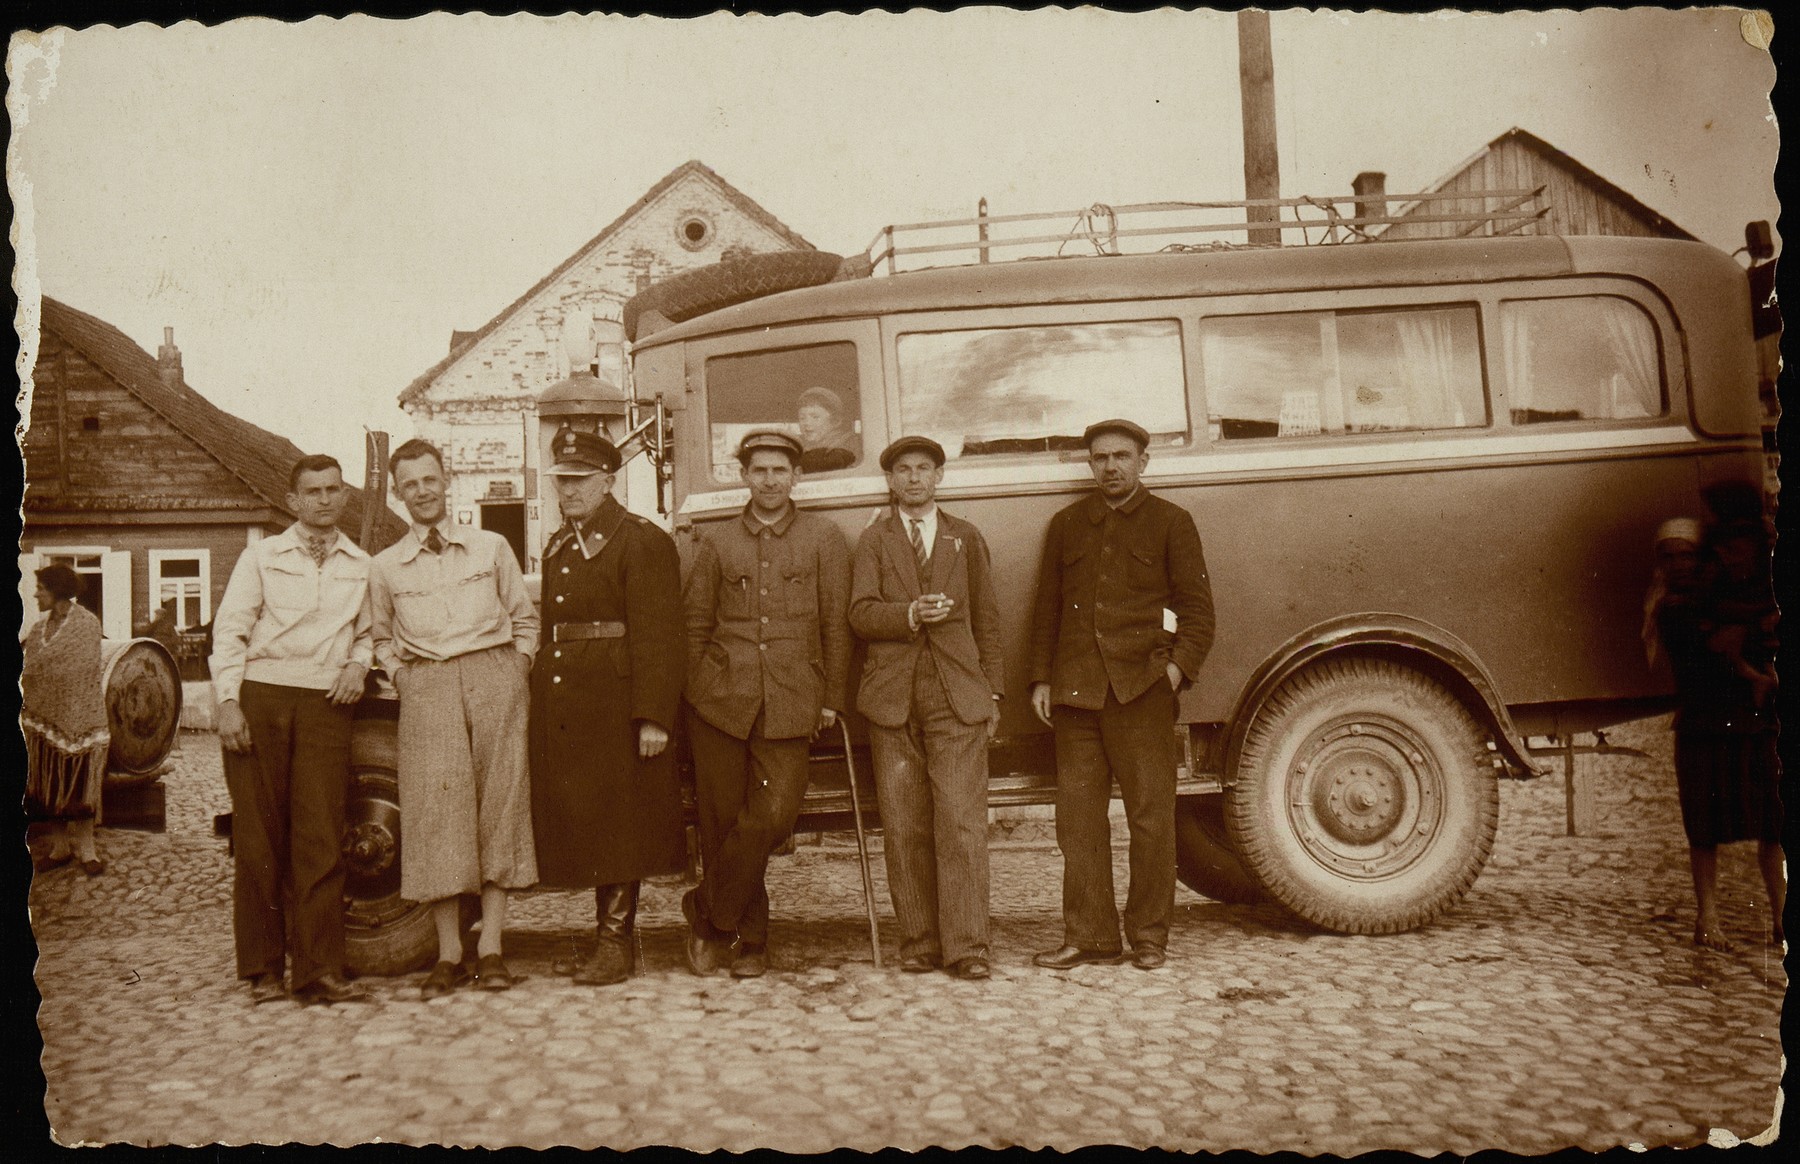 Bus drivers and gas station owners stand next to a bus parked by the shtetl's gas station and bus stop.

(left to right) Moshe Slonimski; Israel Erlich; Avraham Krisilov; a local Polish policemen; and two bus drivers.  Slonimski and Krisilow were co-owners of the Shell Oil station.  Both were murdered by the Germans during the September 1941 mass shooting action.  Israel Erlich was killed by the AK.